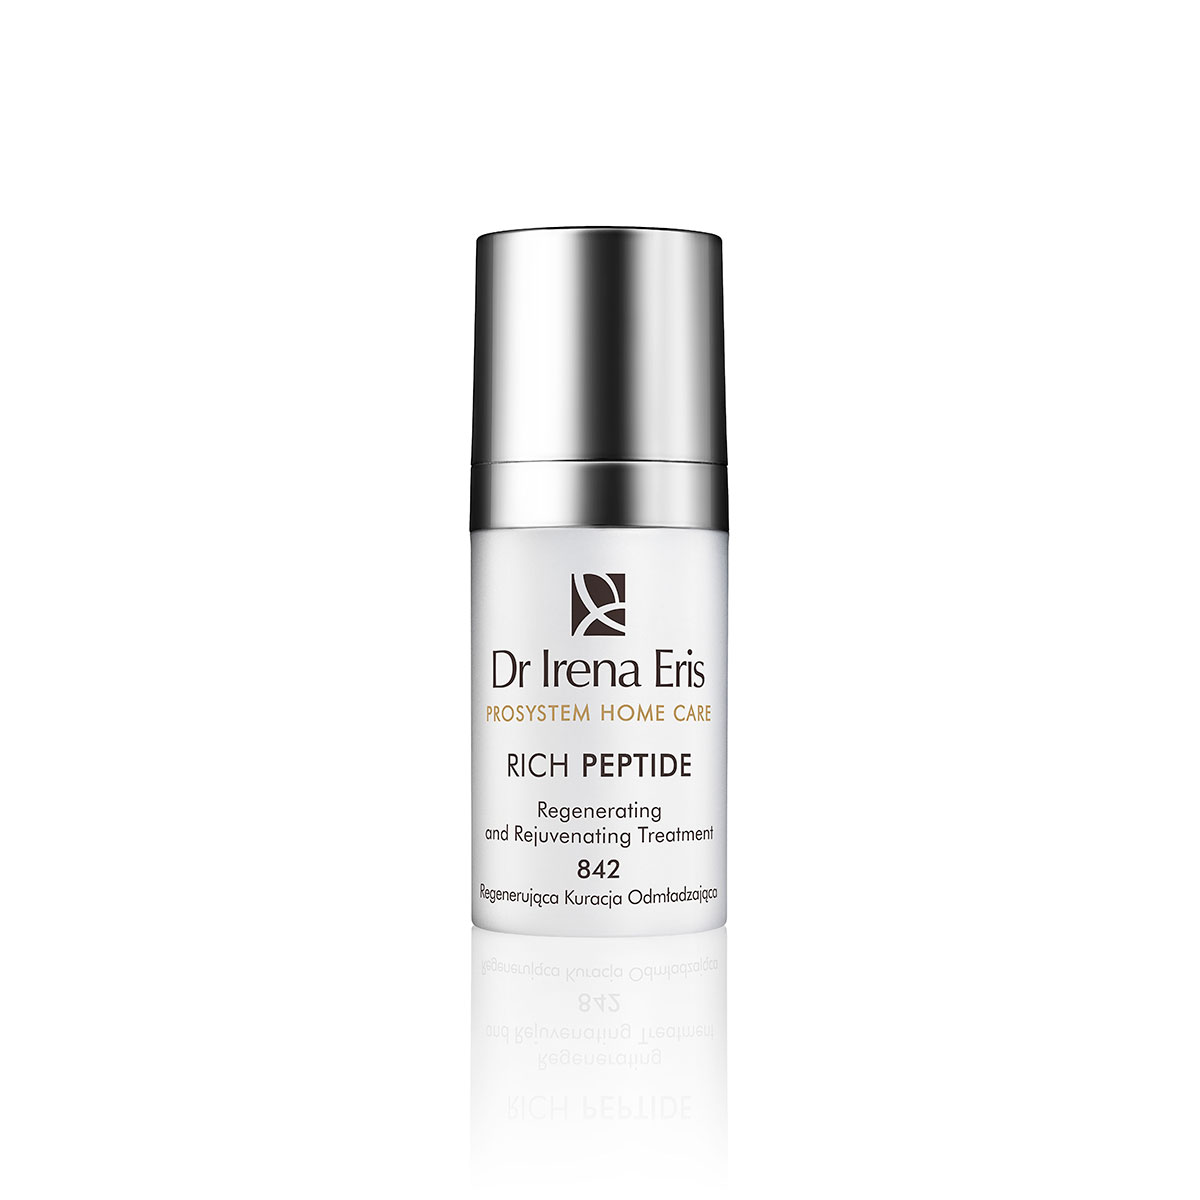  RICH PEPTIDE Regenerating Rejuvenating Treatment Under The Eyes and Around The Mouth 842